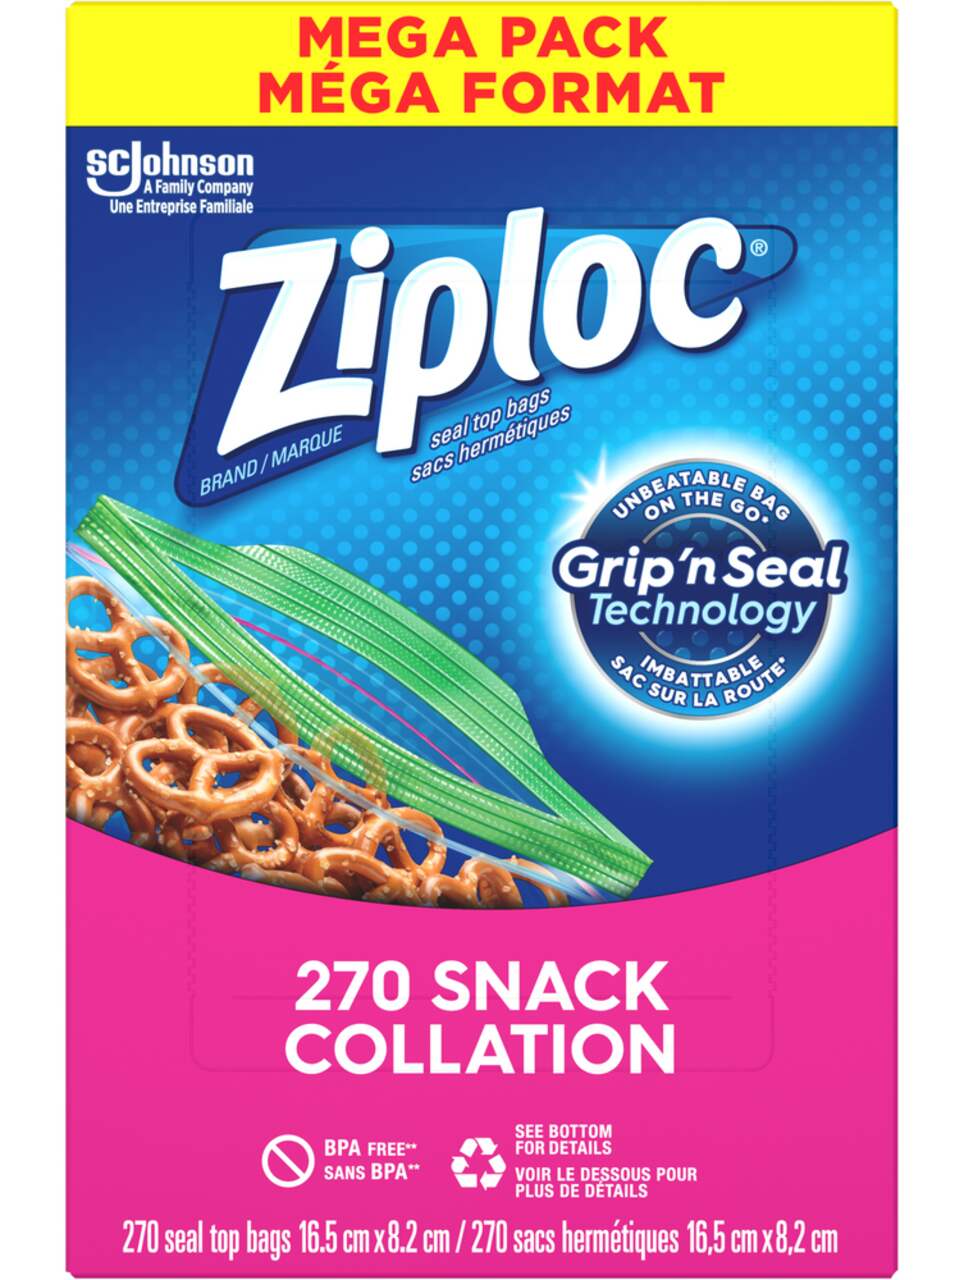 Ziploc Snack Bags for On the Go Freshness, Grip 'n Seal Technology for Easier Grip, Open, and Close, 90 Count, Pack of 3 (270 Total)